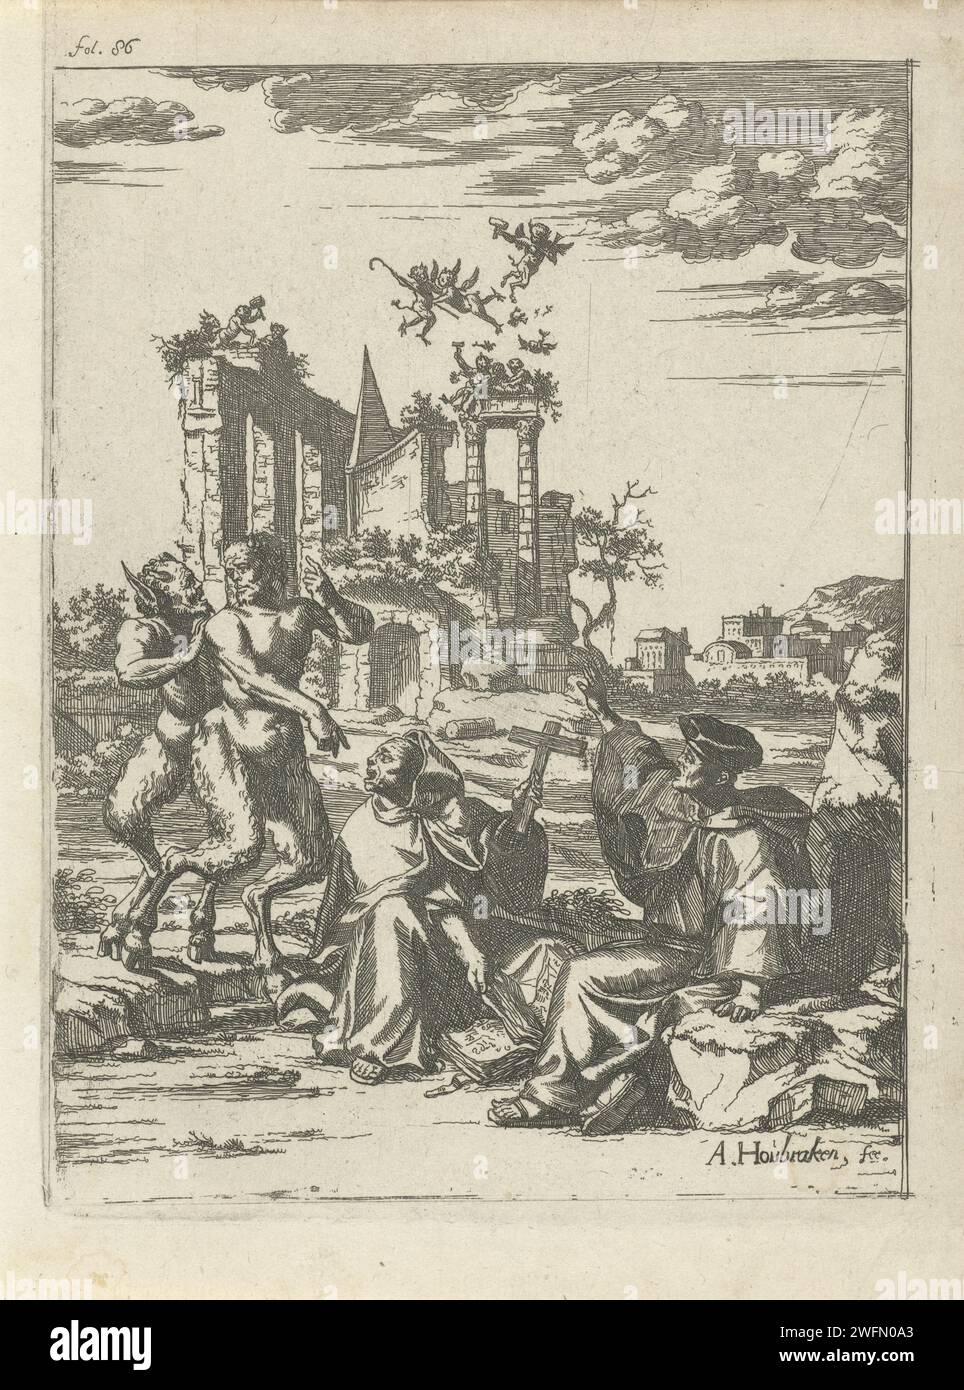 Two Saters and two clergy, Arnold Houbraken, 1699 print Two saters in two clergy in a landscape. The clergymen make repellent gestures and raise a crucifix. In the background a ruin above which angels and devils float. At the top right: Fol 4. Print used in the book: Toneel der Accidents by Lambert van den Bos with a total of twenty prints by Arnold Houbraken. publisher: Dordrechtpublisher: Rotterdam paper etching satyr(s) (in general). landscape with ruins (+ city(-scape) with figures, staffage). monk(s), friar(s) (+ devil(s)). cross as symbol of Christ Stock Photo